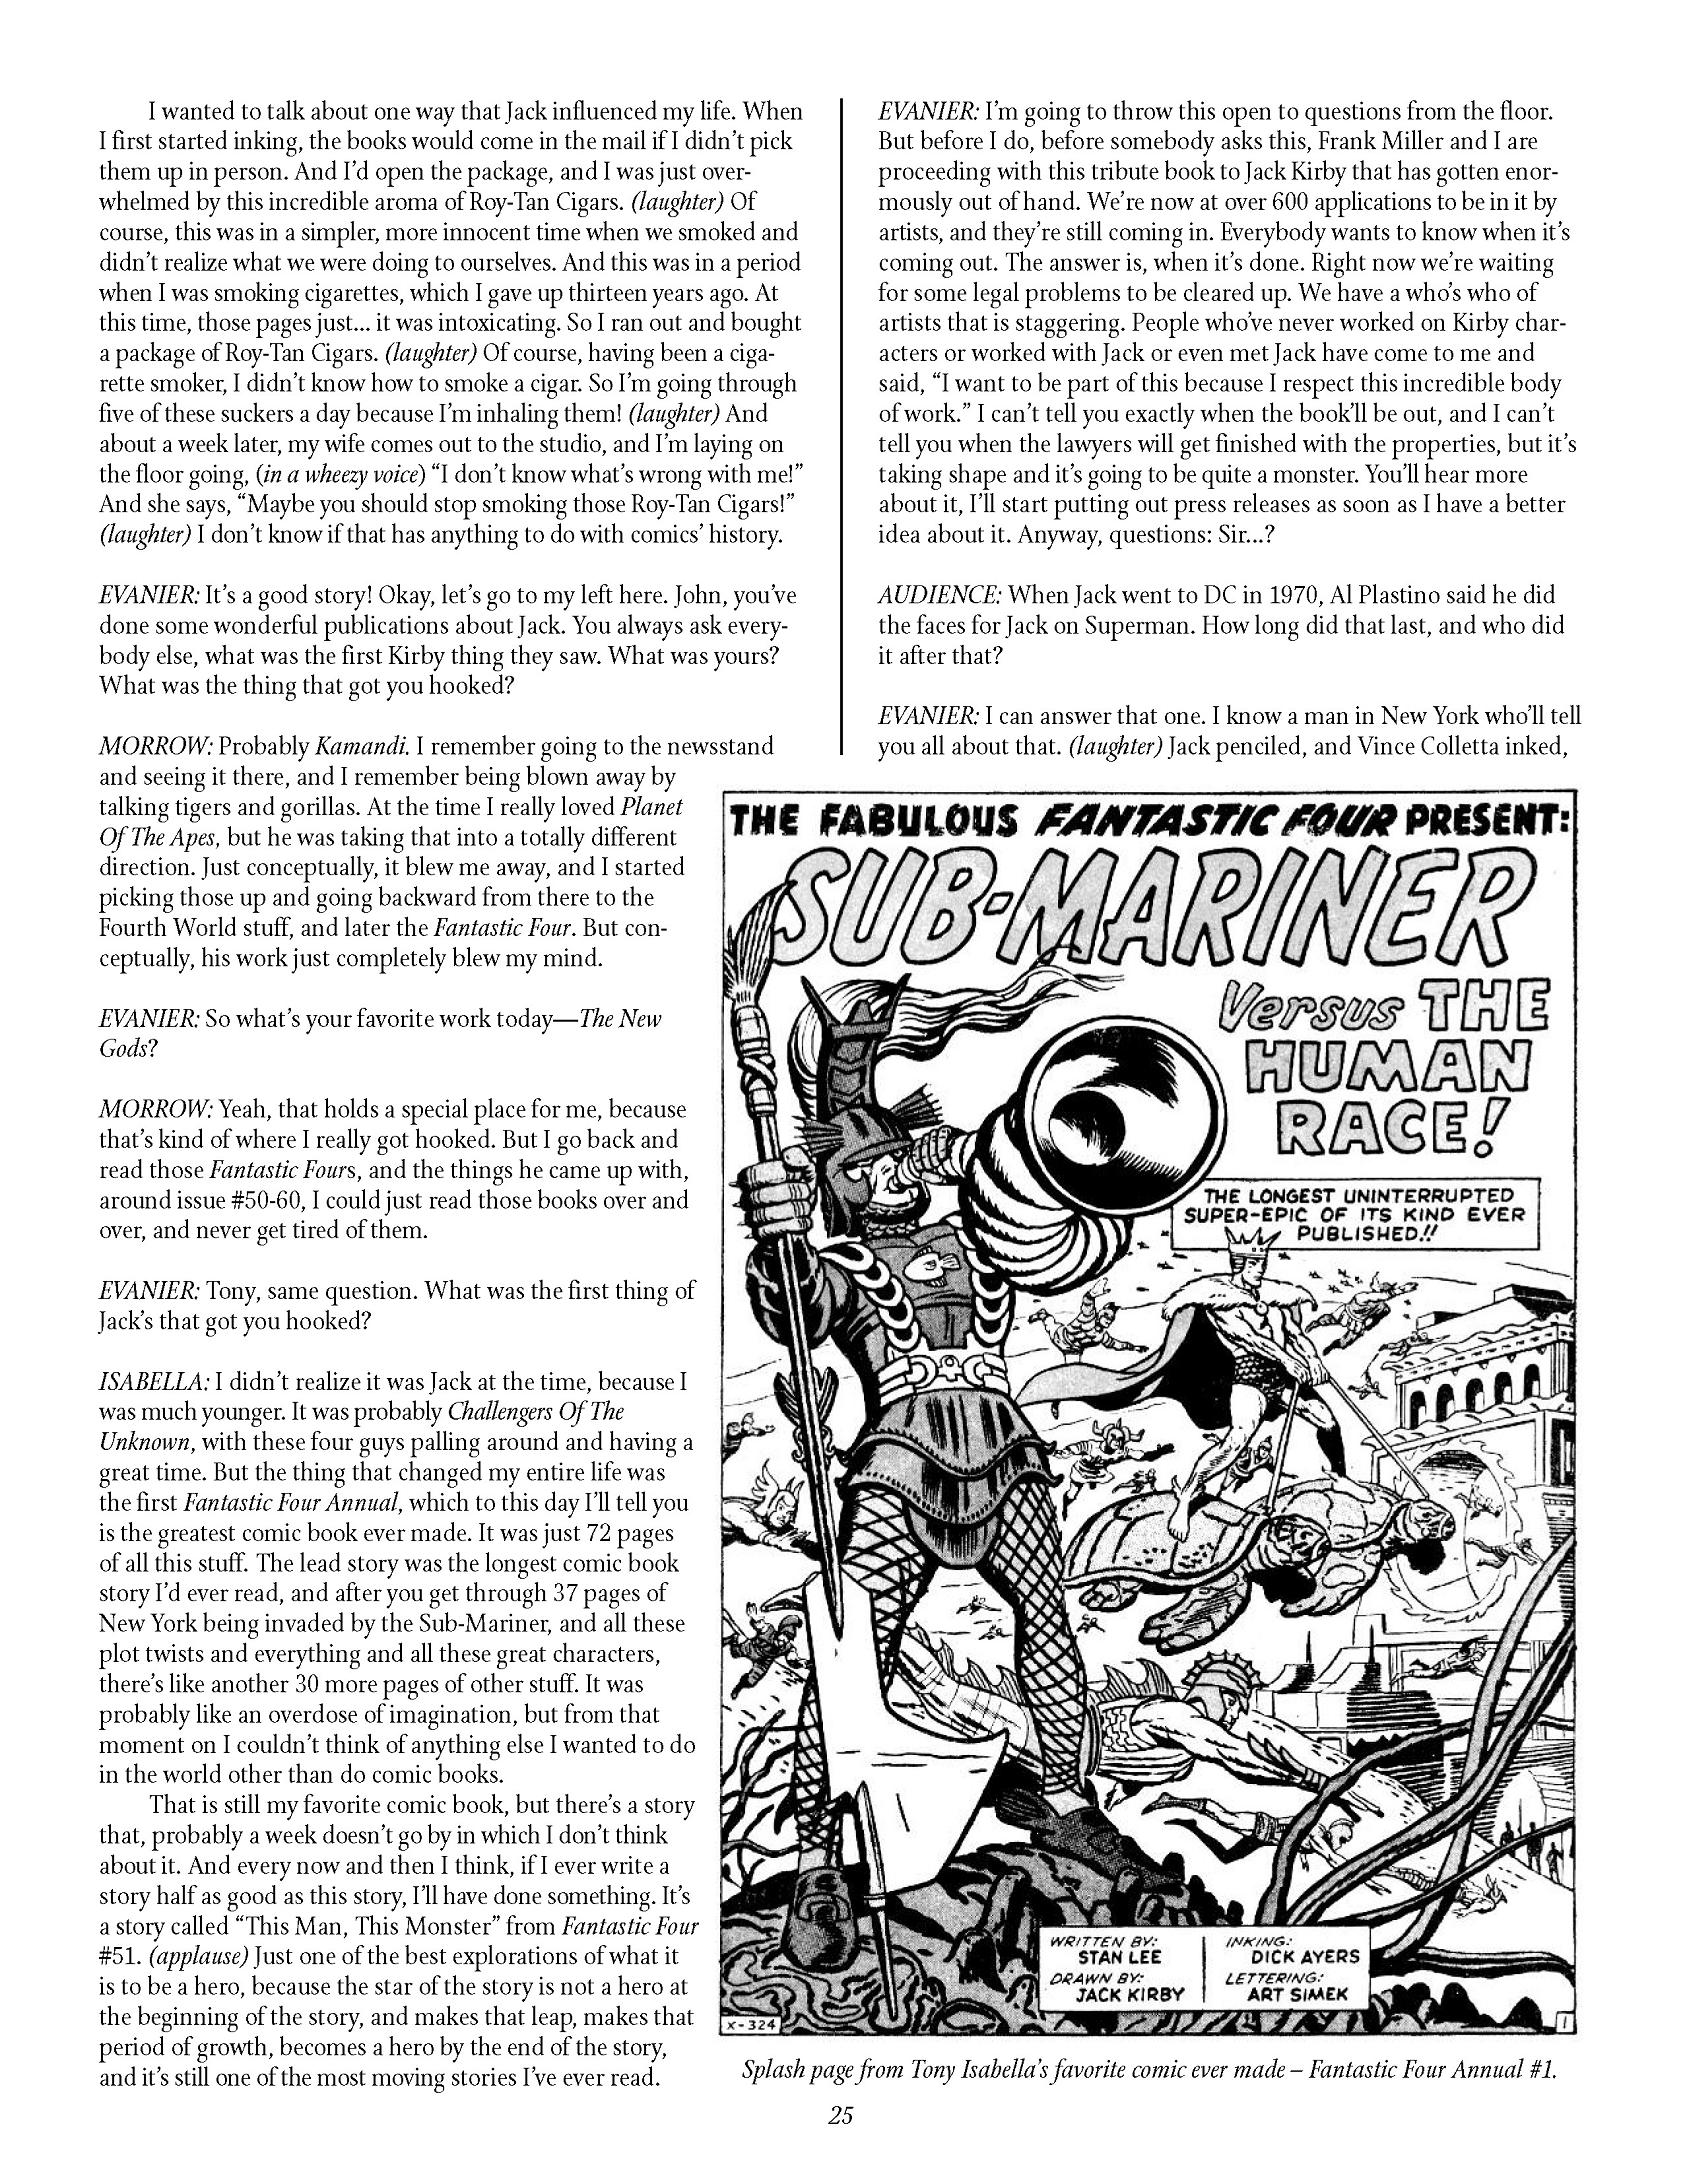 Read online The Jack Kirby Collector comic -  Issue #8 - 24